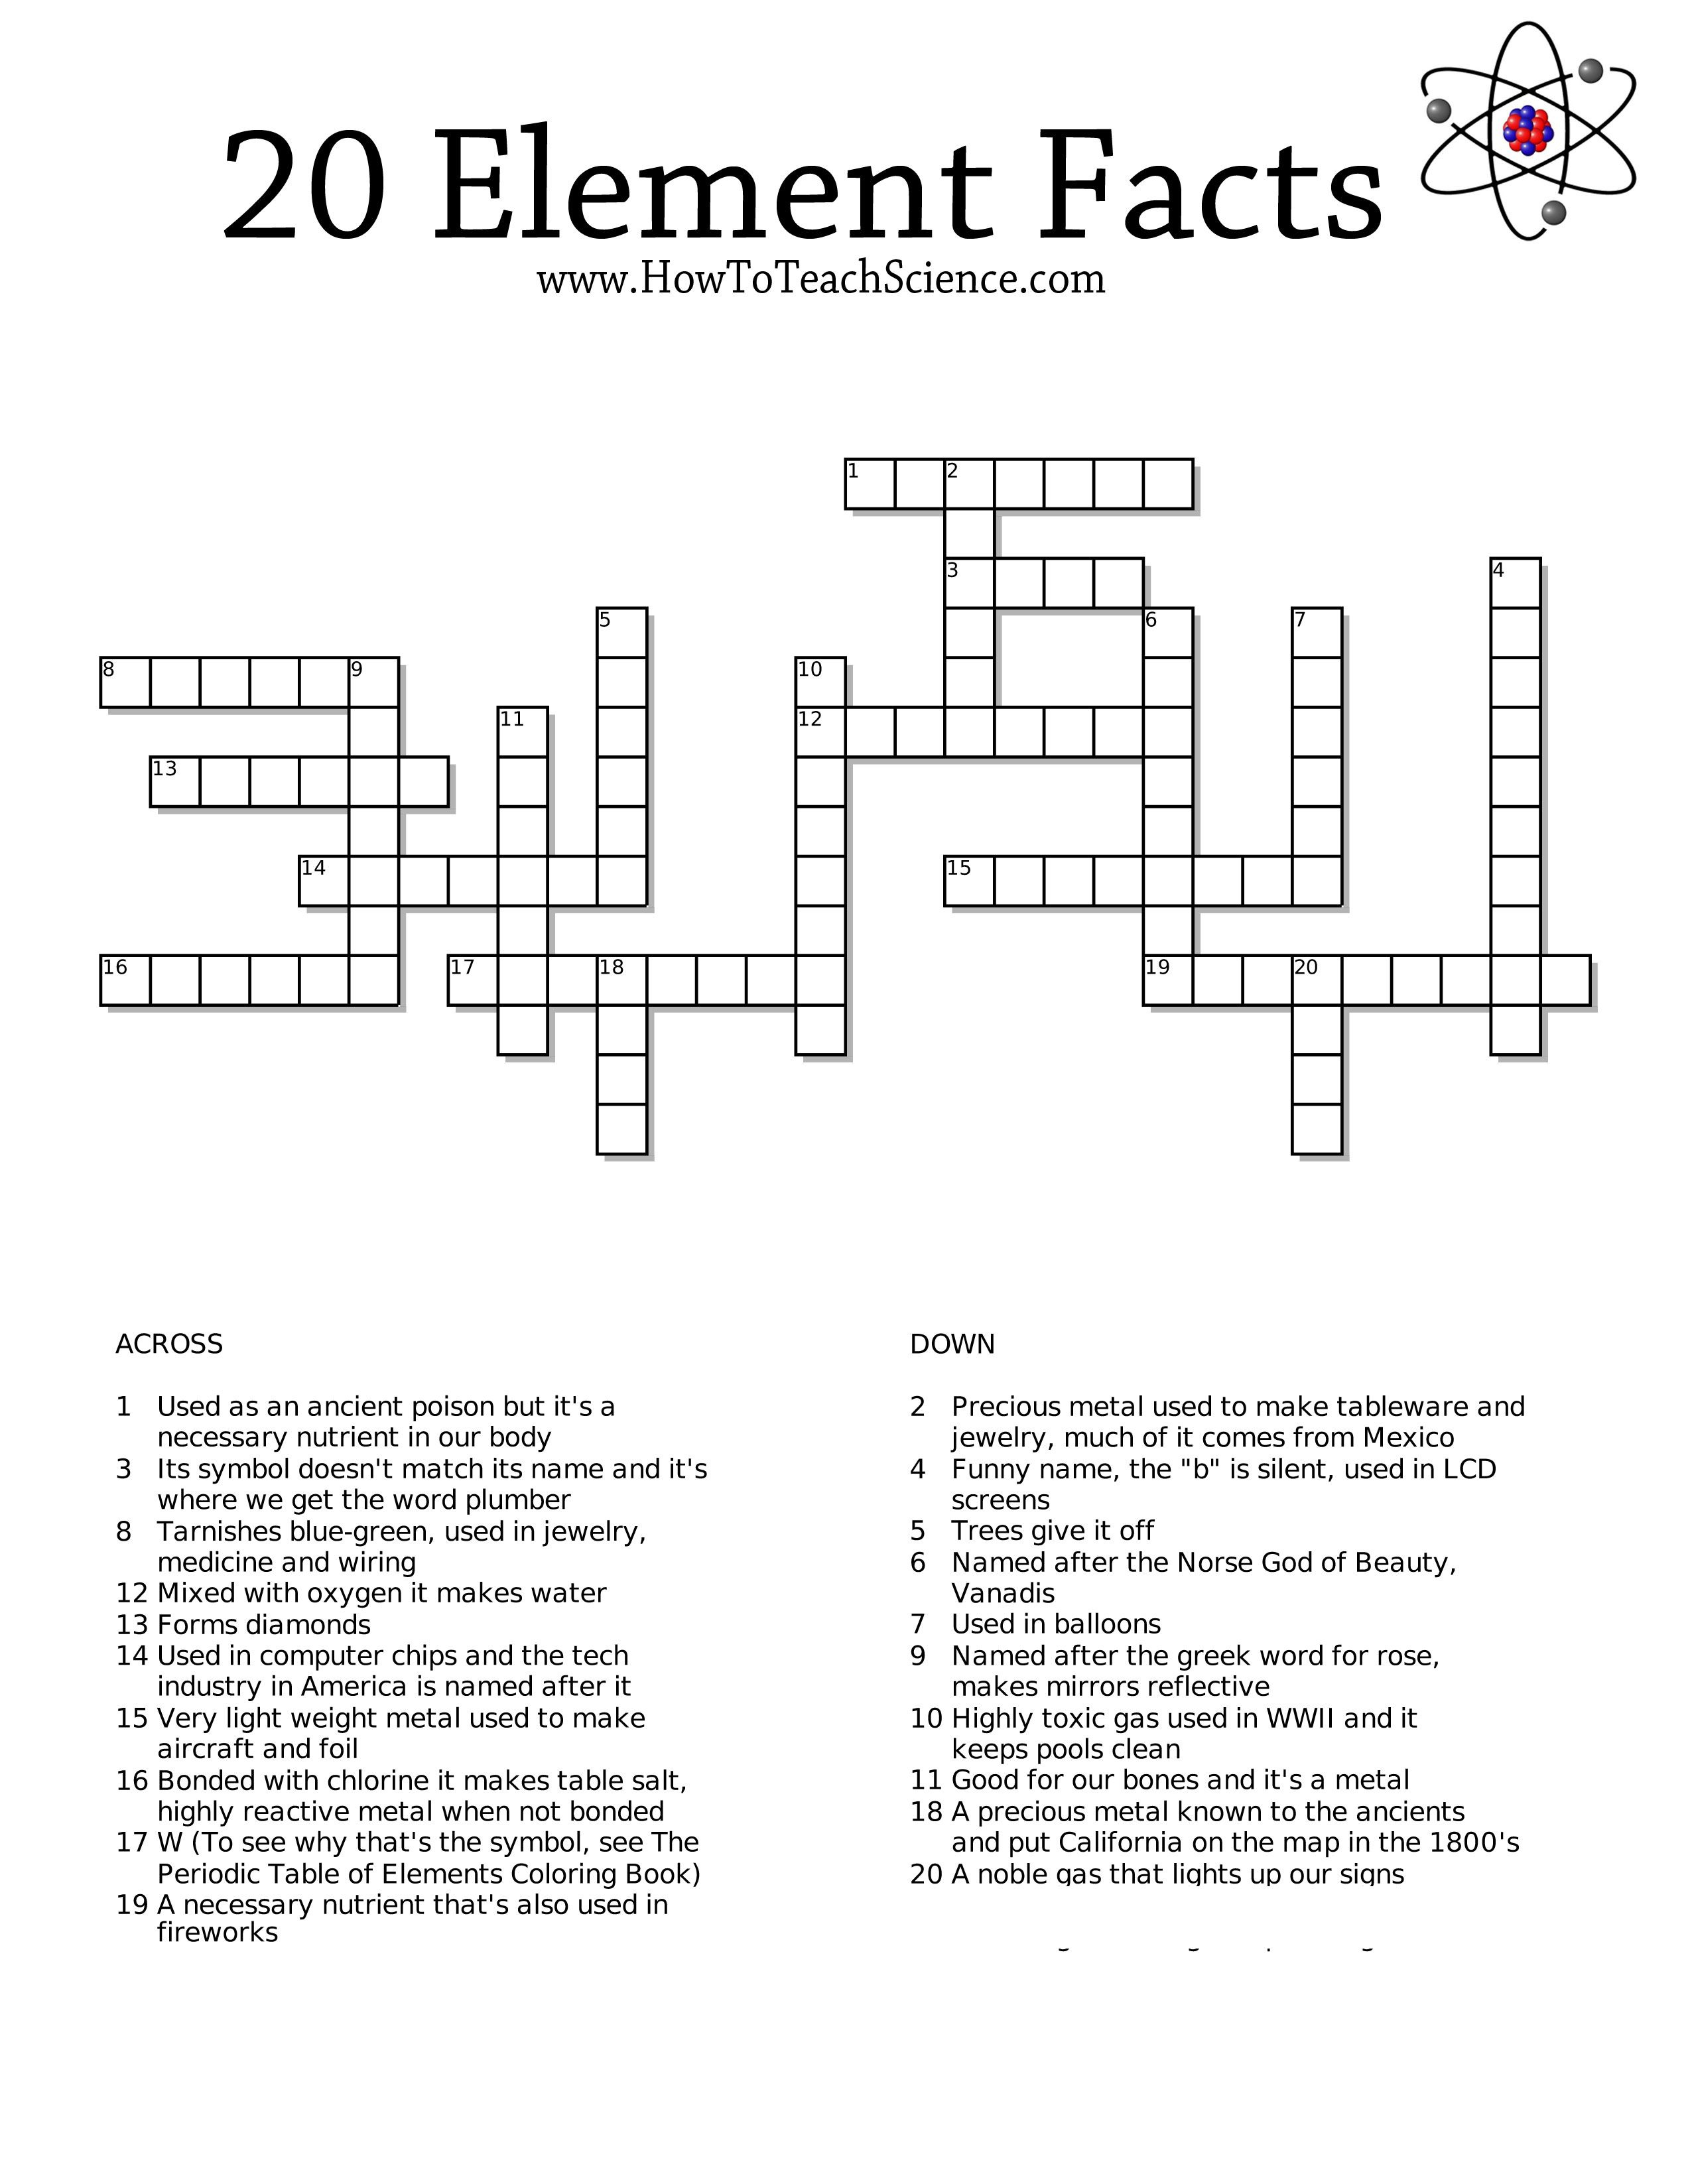 Free Crossword Printables On The Elements For 3Rd Grade Through High - Printable Crossword Puzzles Science